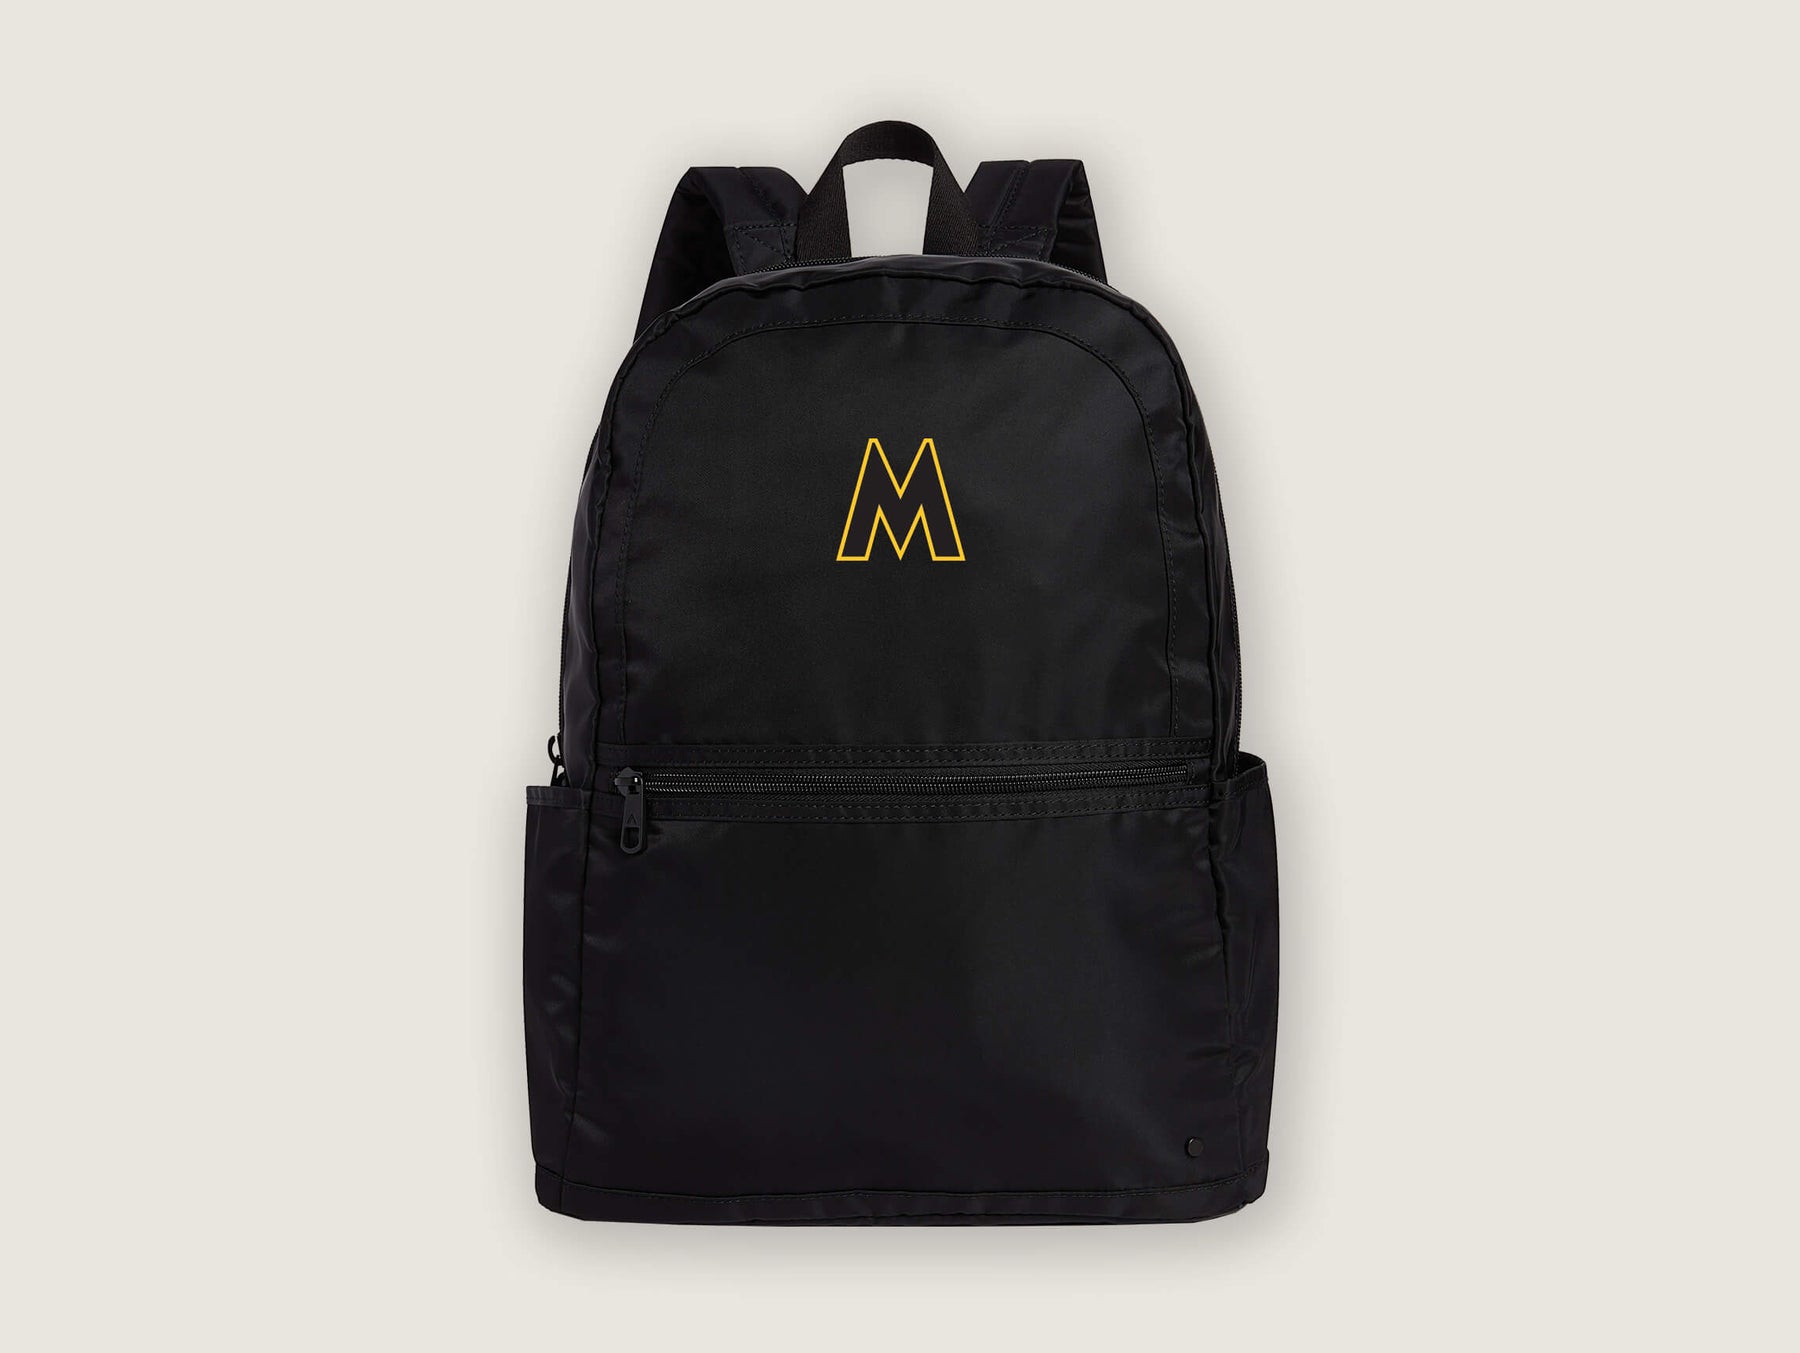 The MOSCOT Backpack